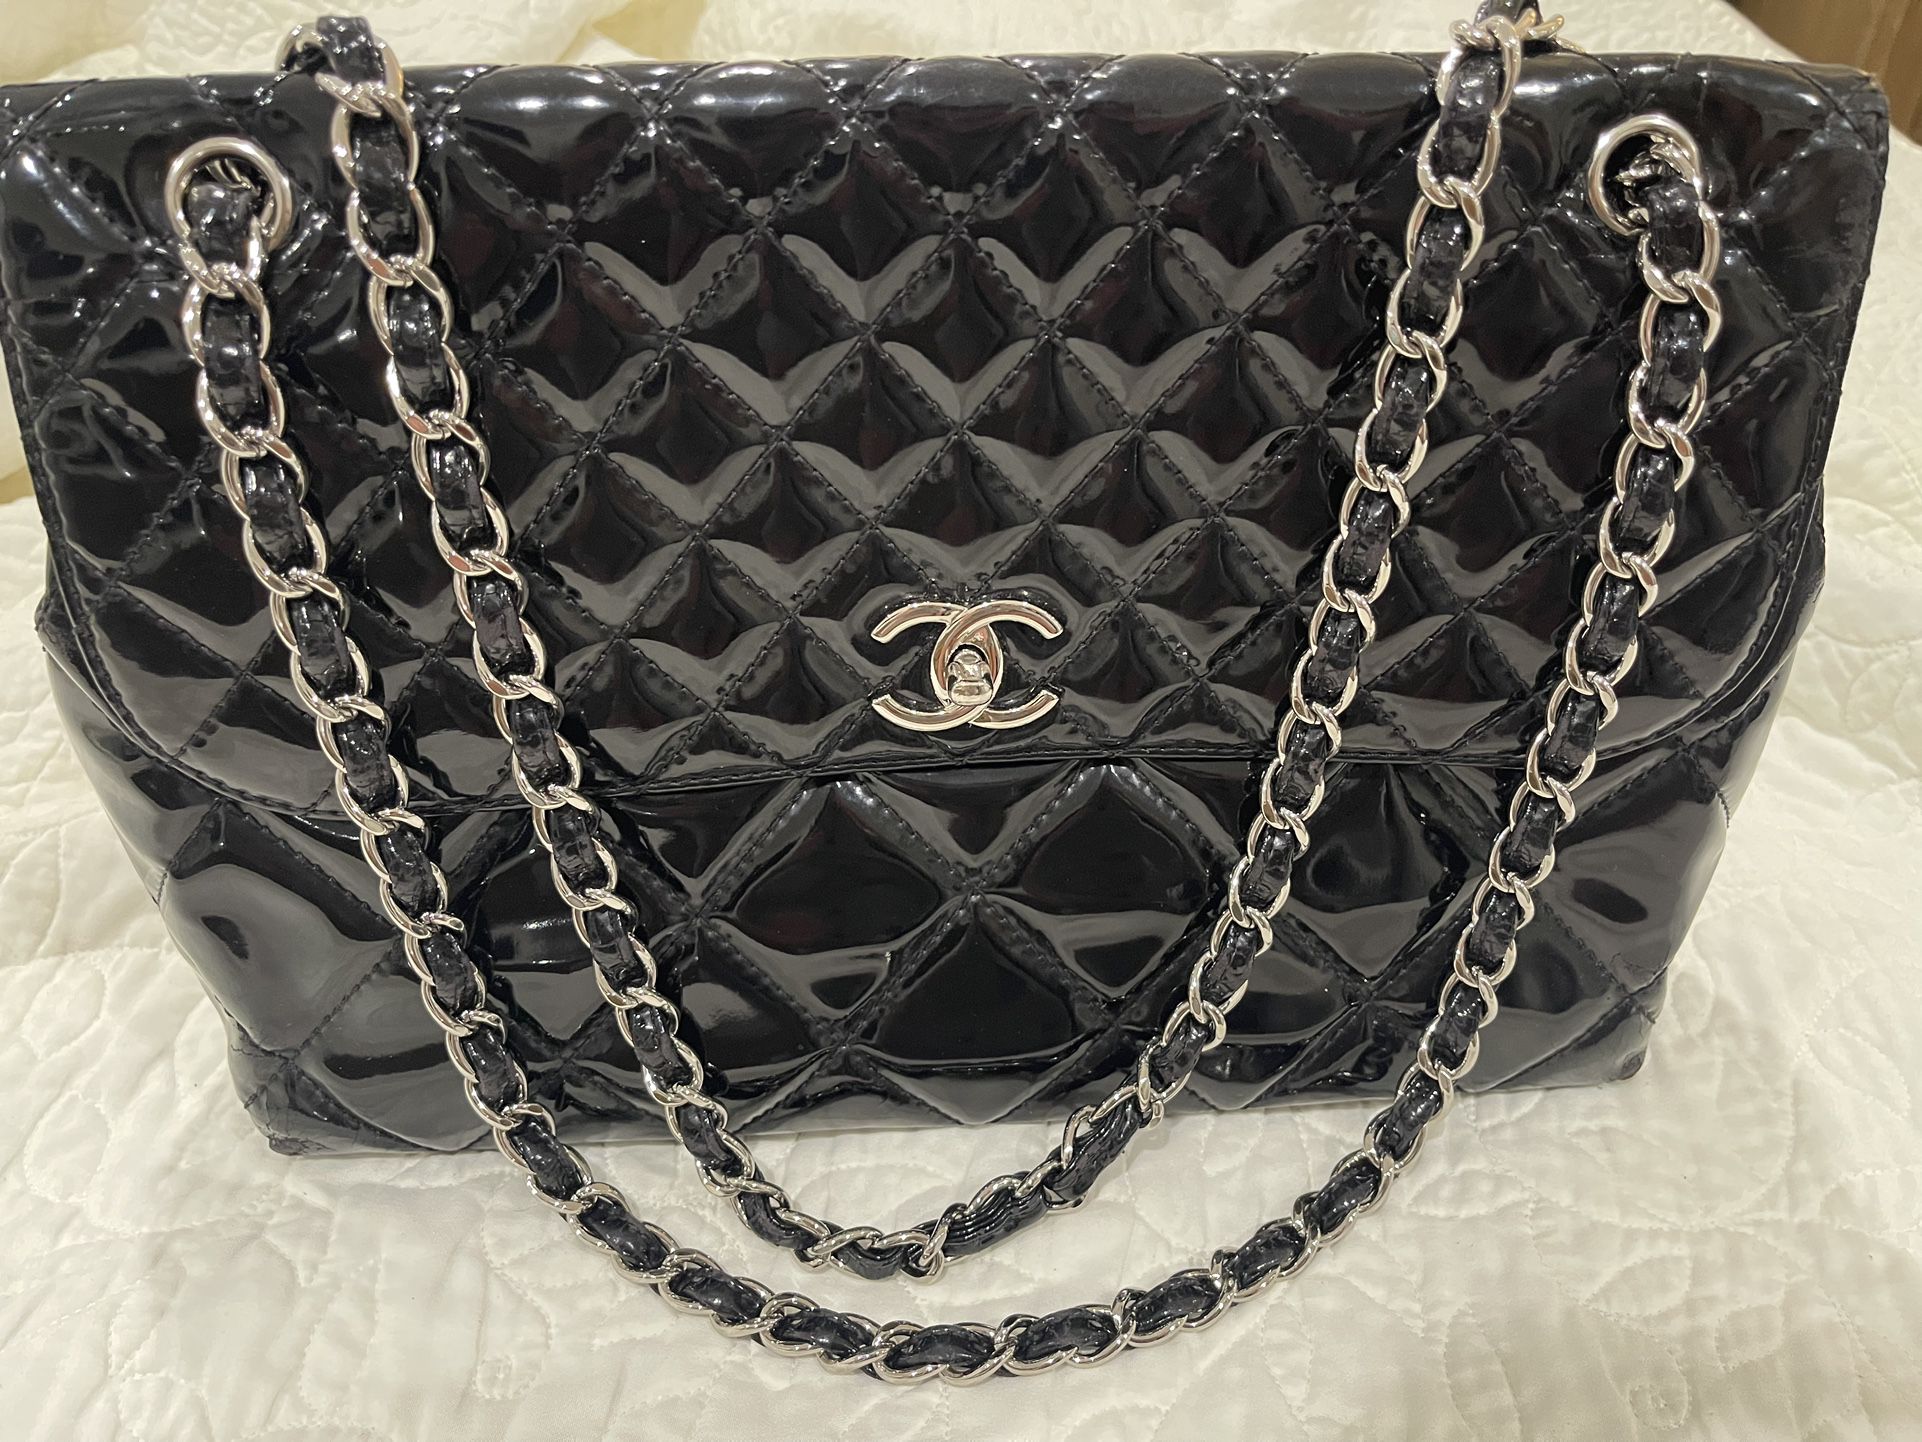 Chanel Single Flap Quilted Bag for Sale in Pasadena, CA - OfferUp